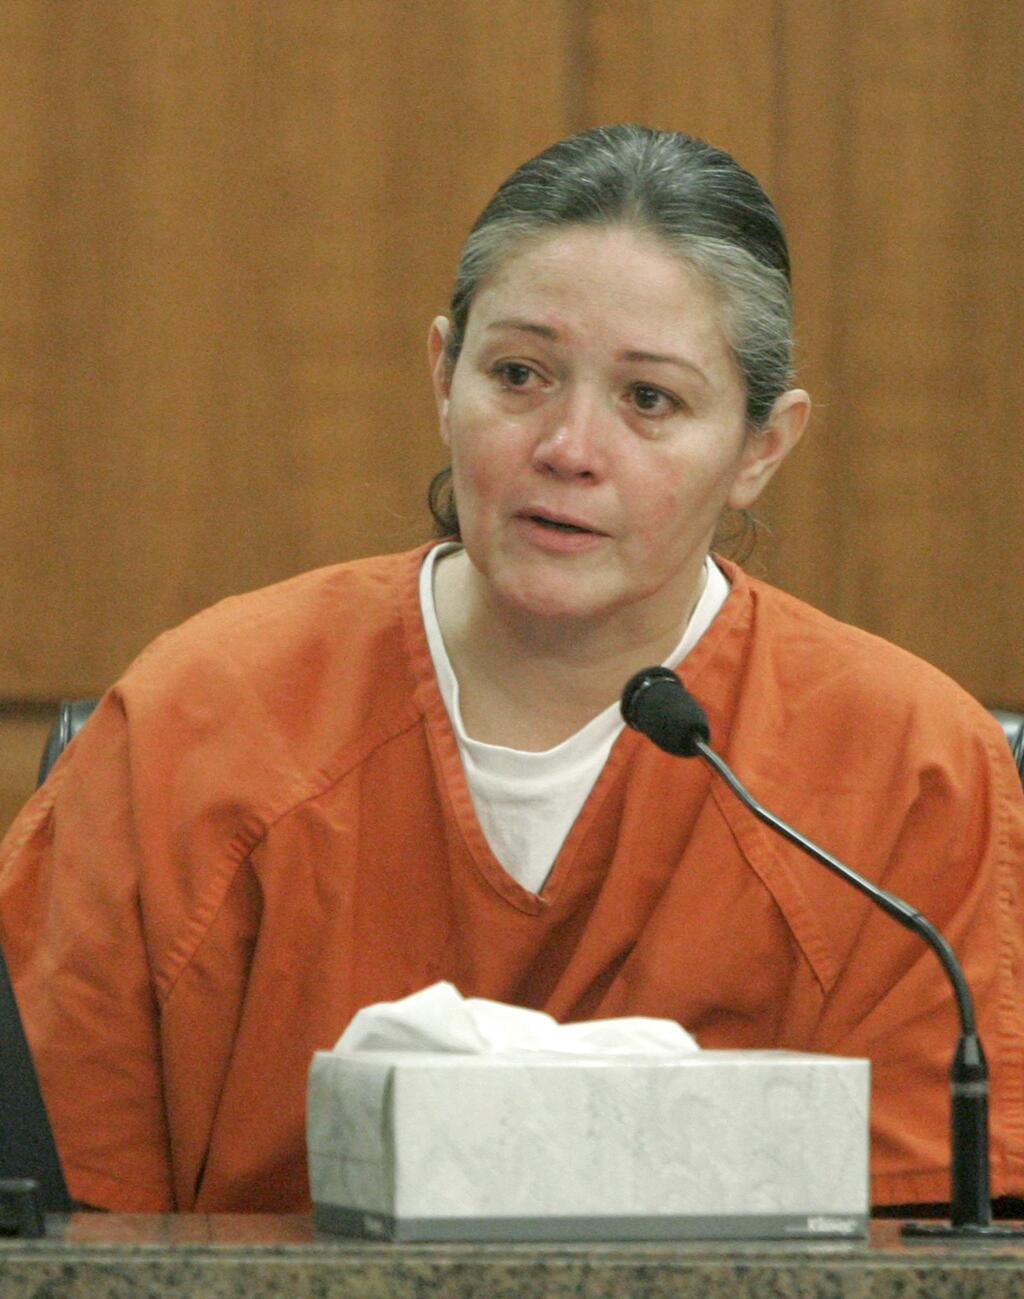 FILE - In this Jan. 16, 2007, file photo, convicted murderer Clara Harris takes the stand in Houston, during a wrongful-death civil suit against her. The Texas woman who killed her cheating husband by running him down with her car in a jealous rage has been released from prison. Sixty-year-old Harris left prison Friday, May 11, 2018, after serving 15 years of a 20-year sentence in the death of her orthodontist husband in 2002 in the parking lot of a suburban Houston hotel. (AP Photo/Pat Sullivan, File)